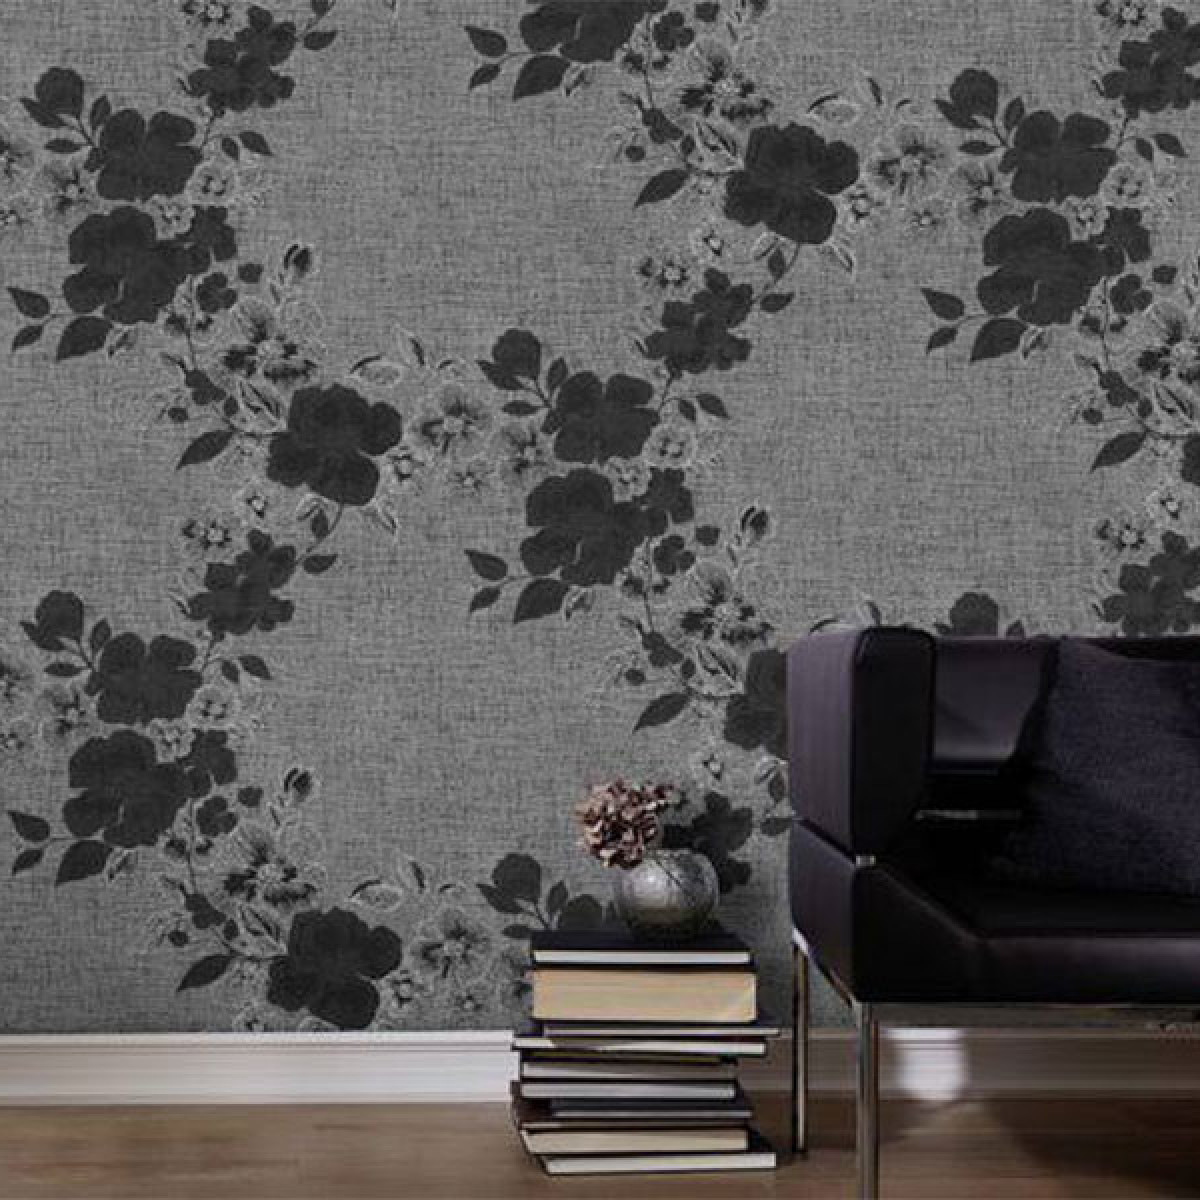 6 ways to incorporate the black and white wallpaper trend | Habitat by